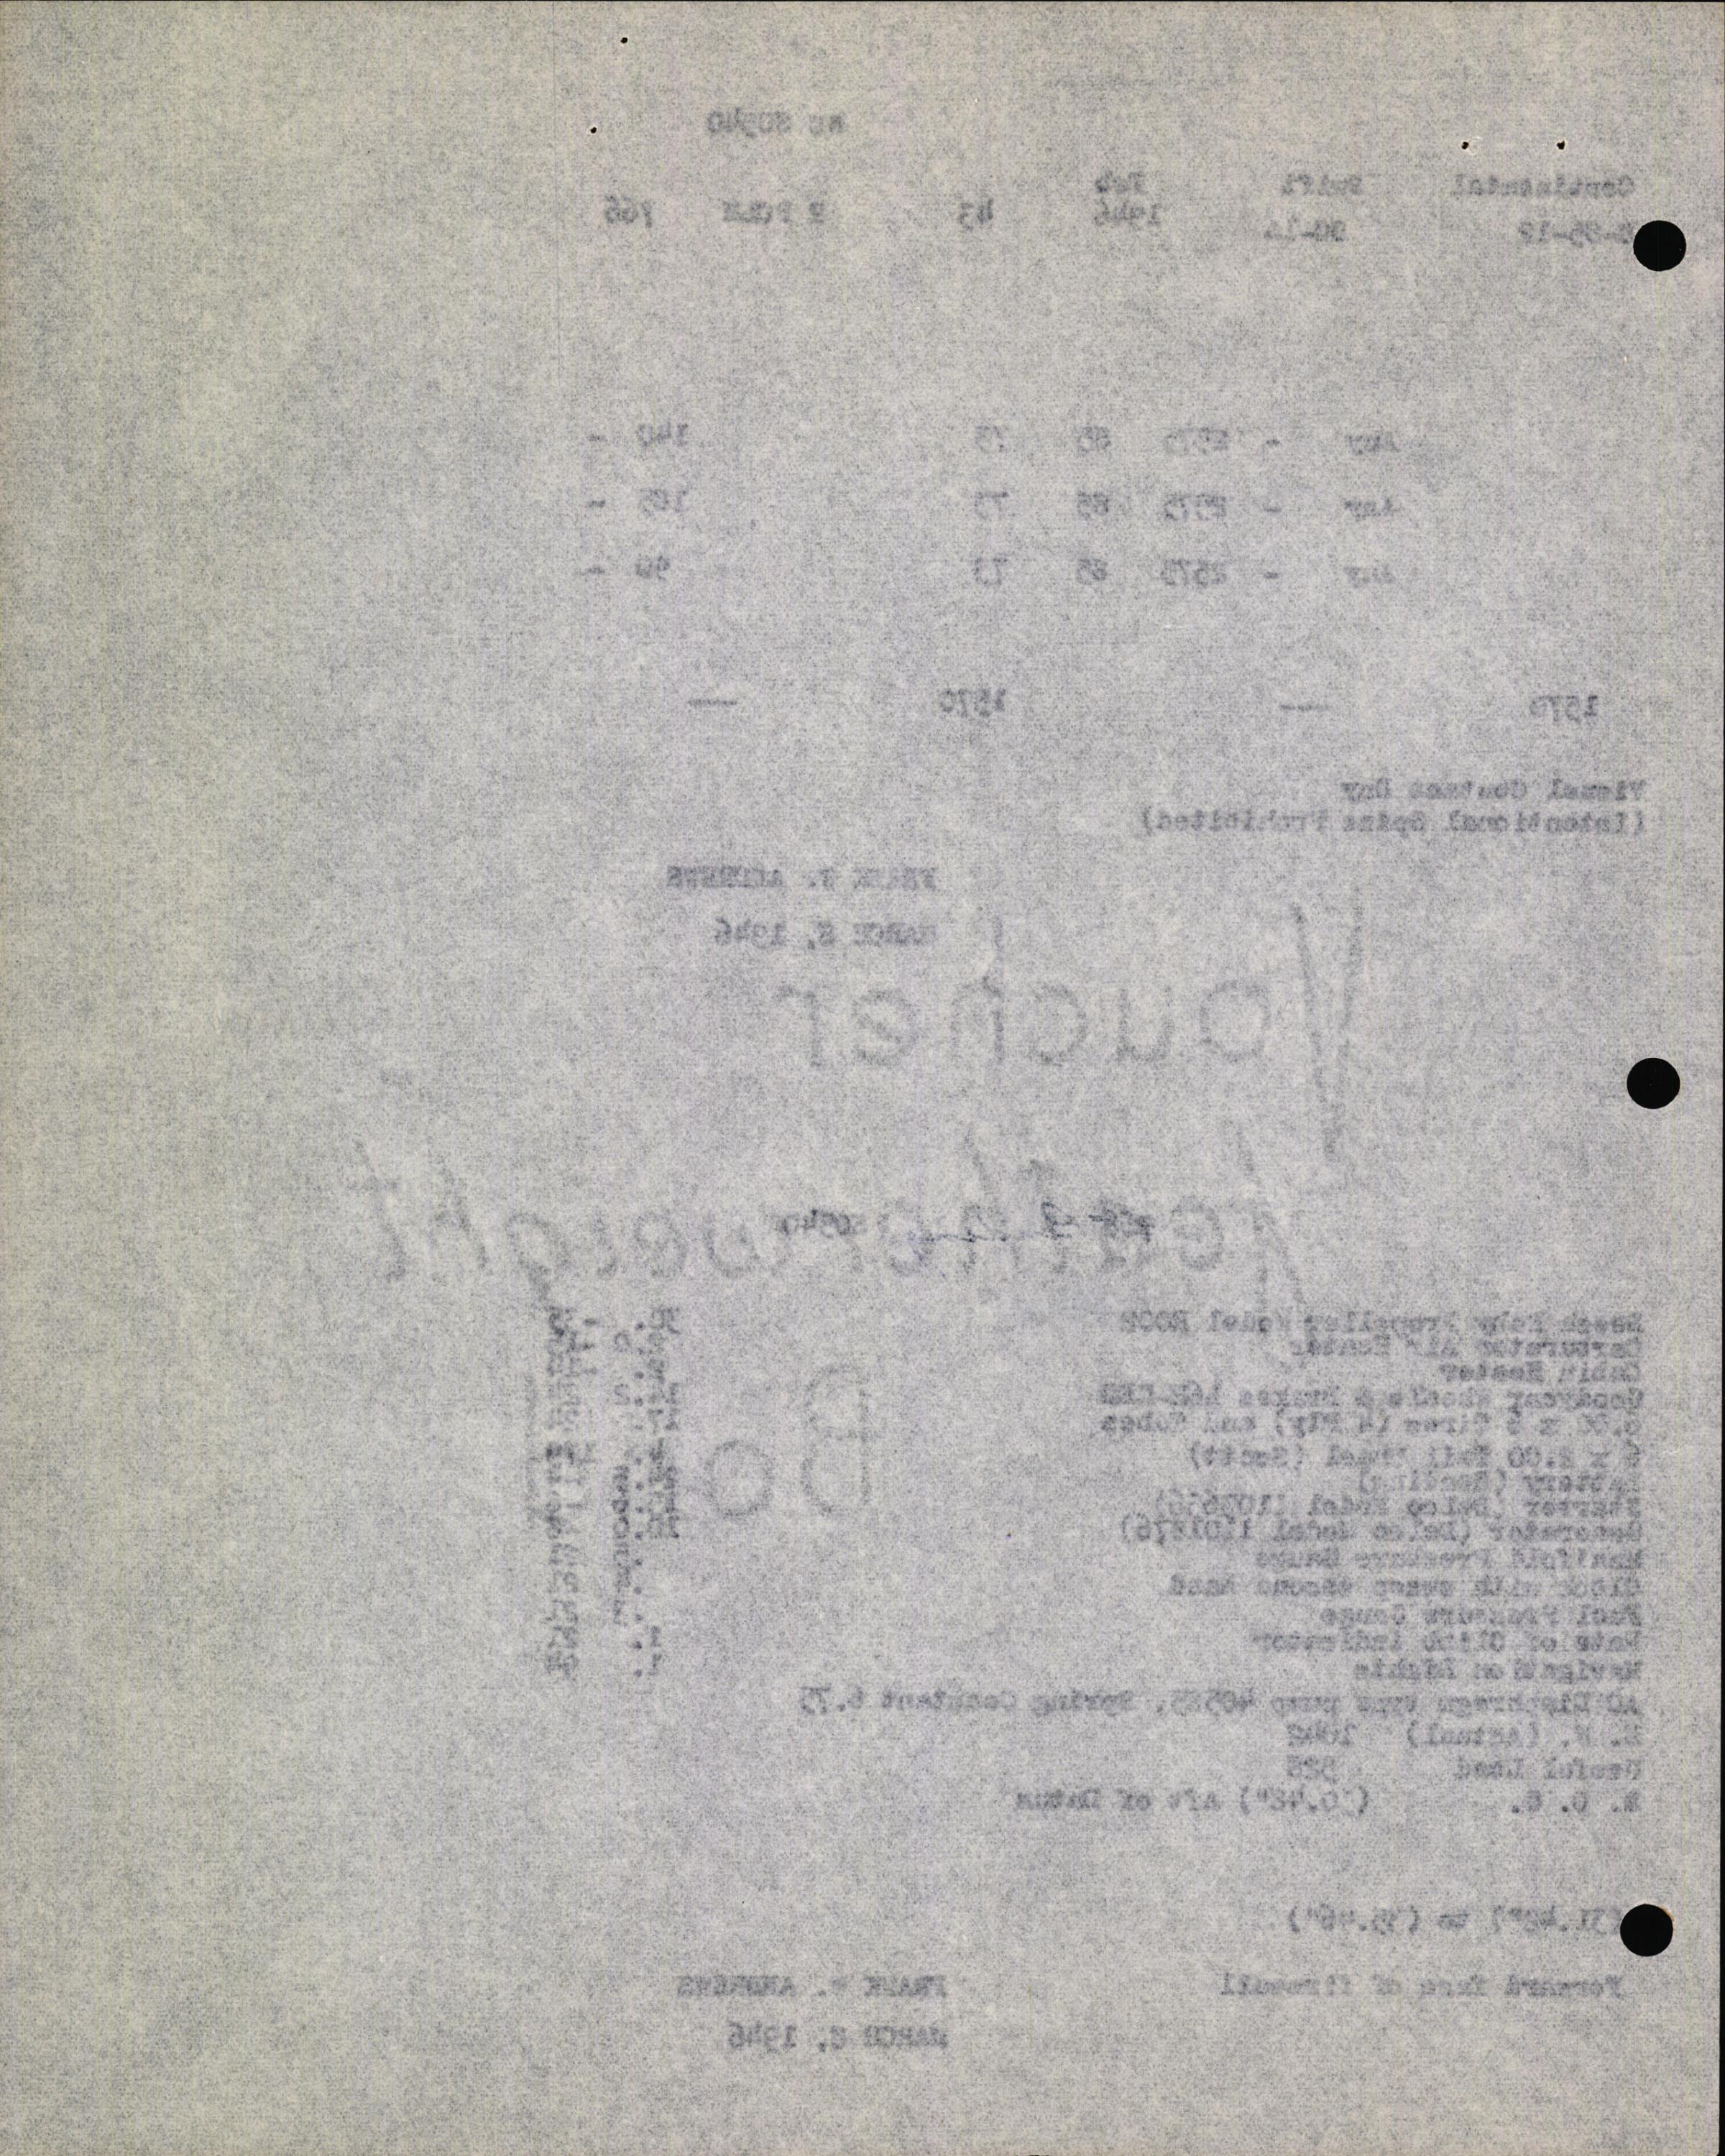 Sample page 6 from AirCorps Library document: Technical Information for Serial Number 43